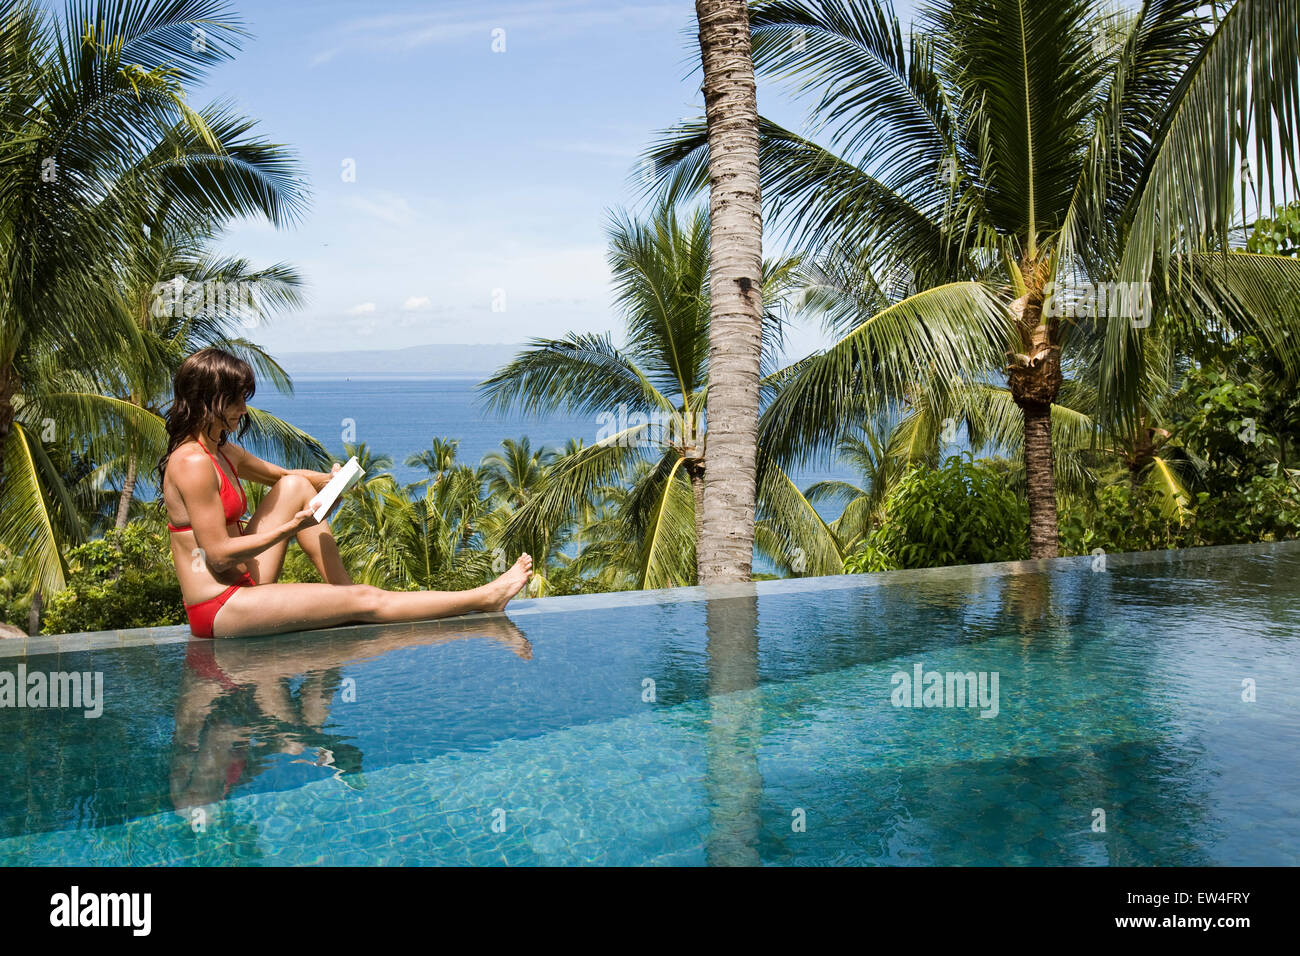 A woman relaxing by the pool reading a book under a palm tree. Stock Photo